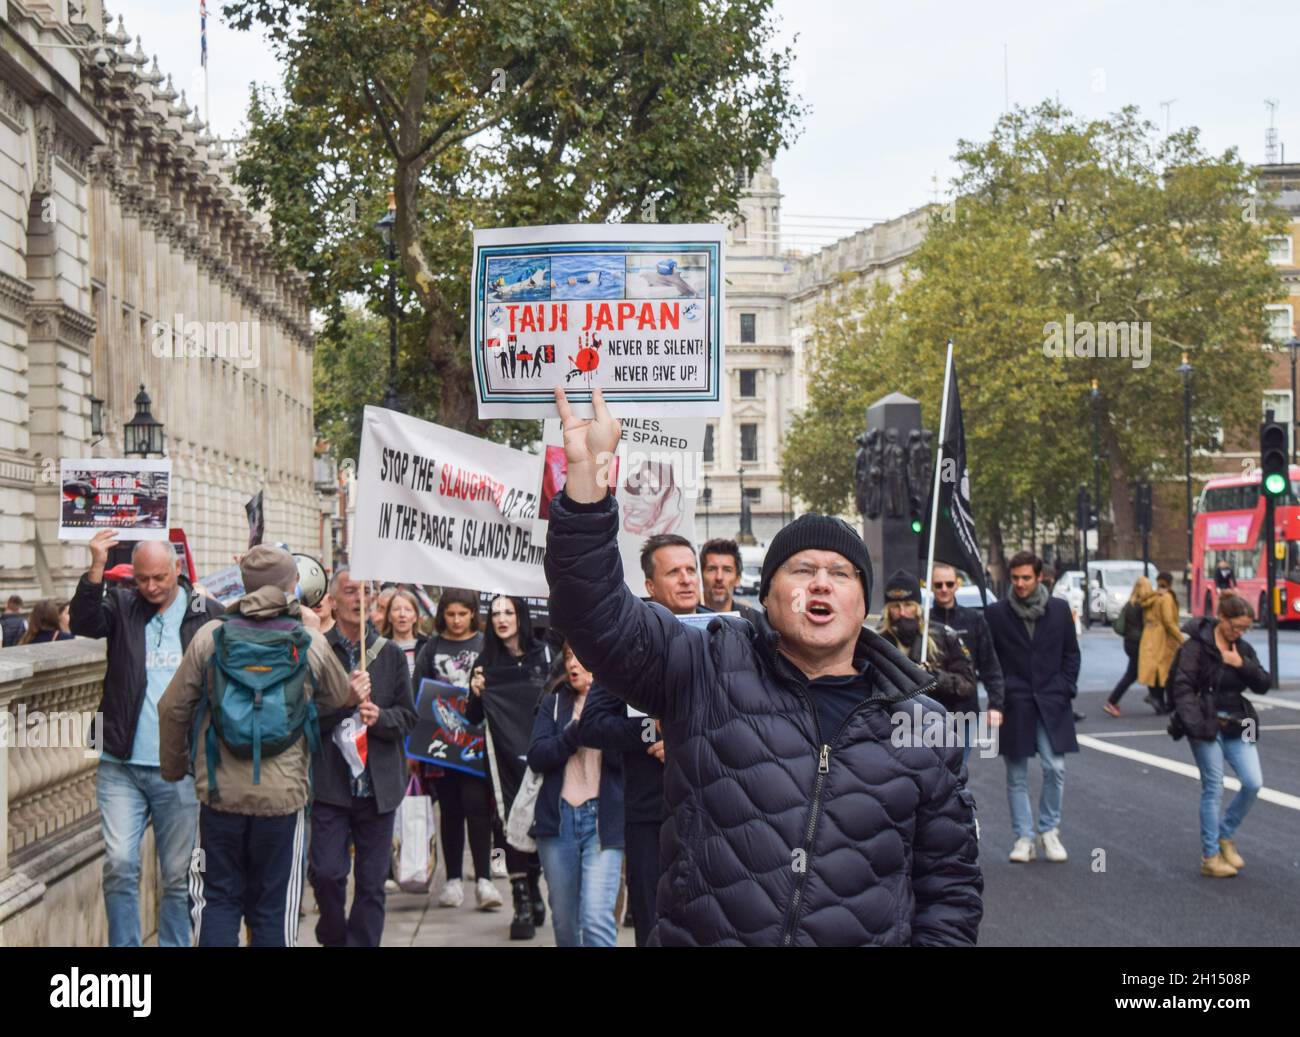 London, UK. 16th October 2021. Protesters in Whitehall. Sea Shepherd and other activists marched through Westminster, calling for an end to the slaughter of dolphins in Faroe Islands and Taiji, Japan. Credit: Vuk Valcic / Alamy Live News Stock Photo